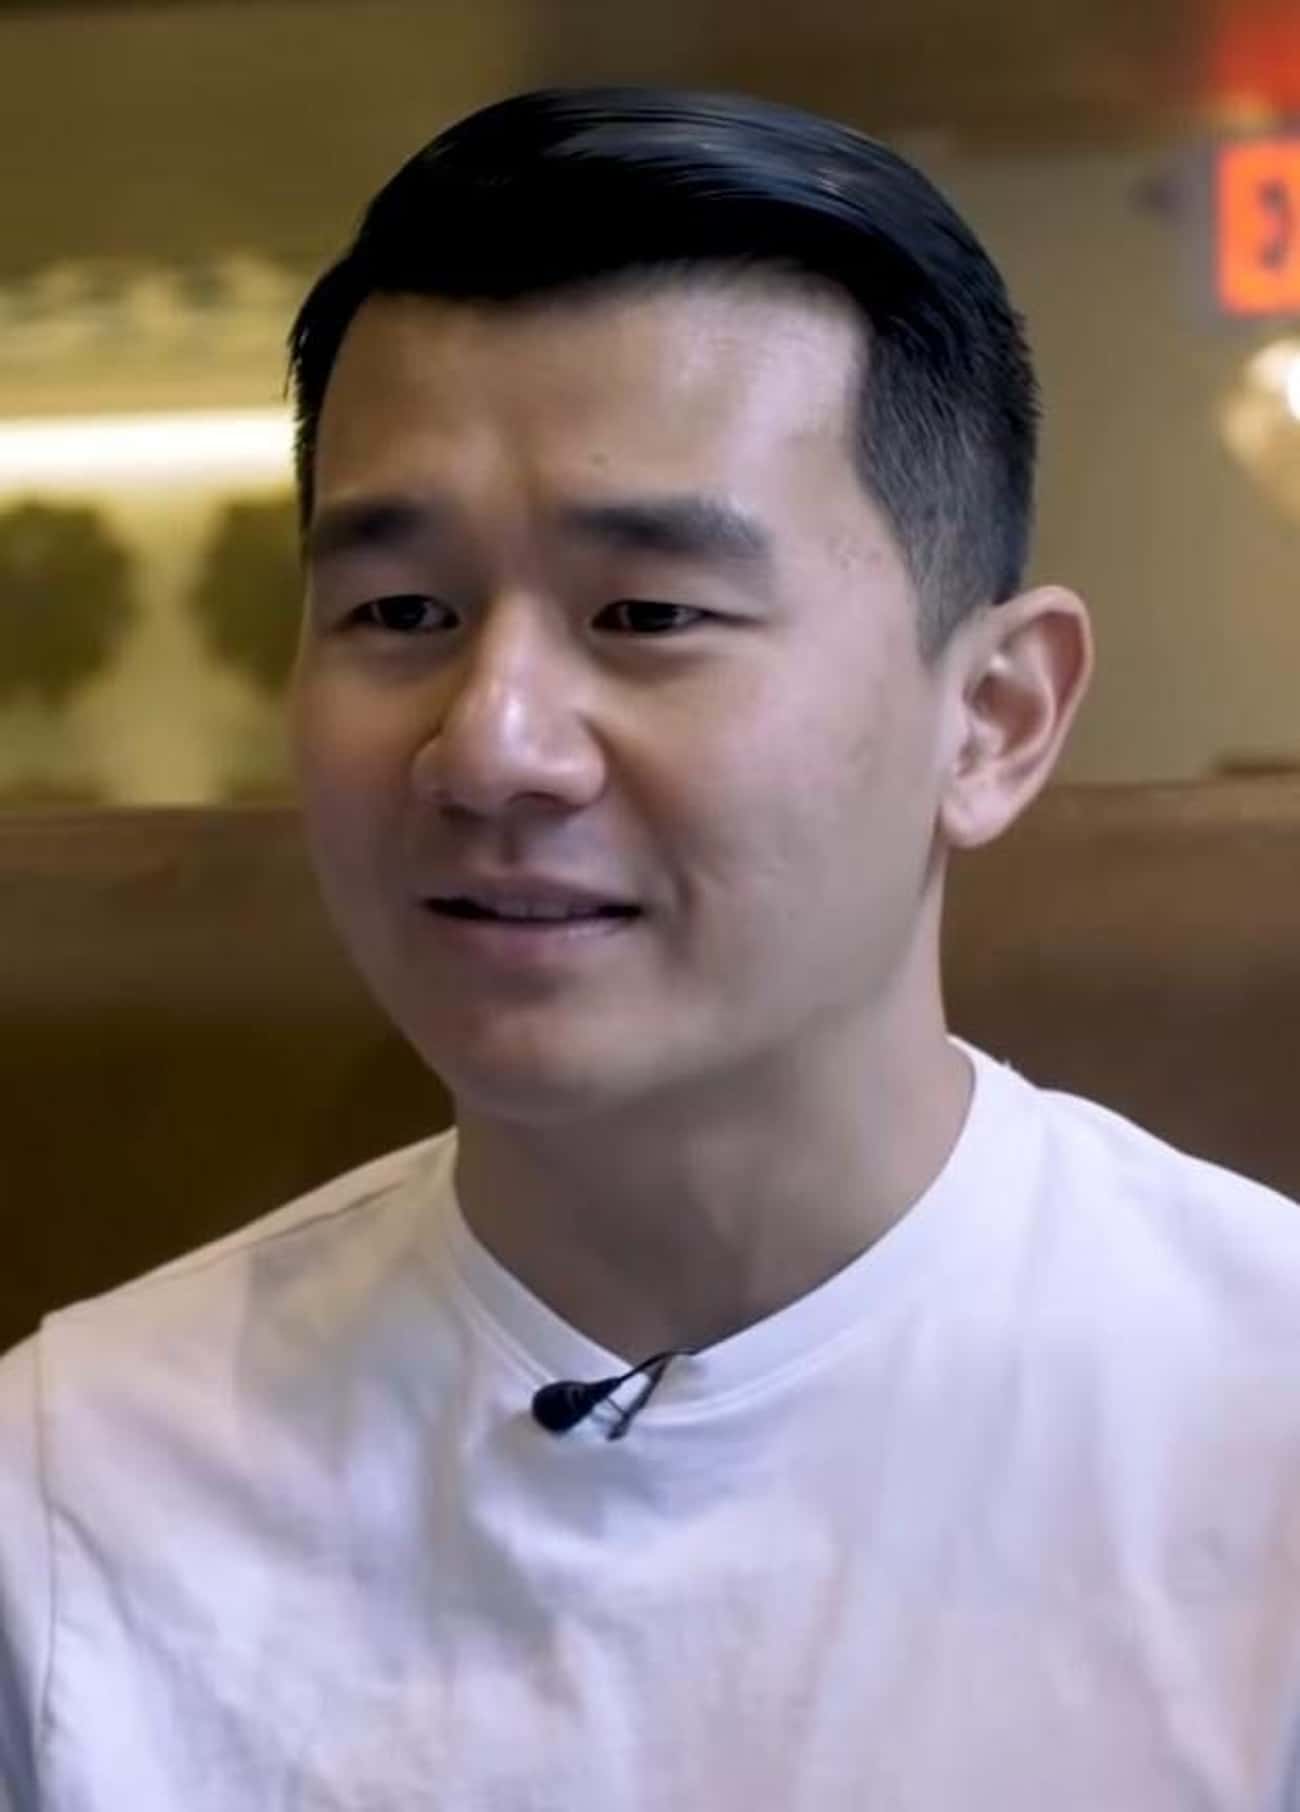 Ronny Chieng (@ronnychieng)